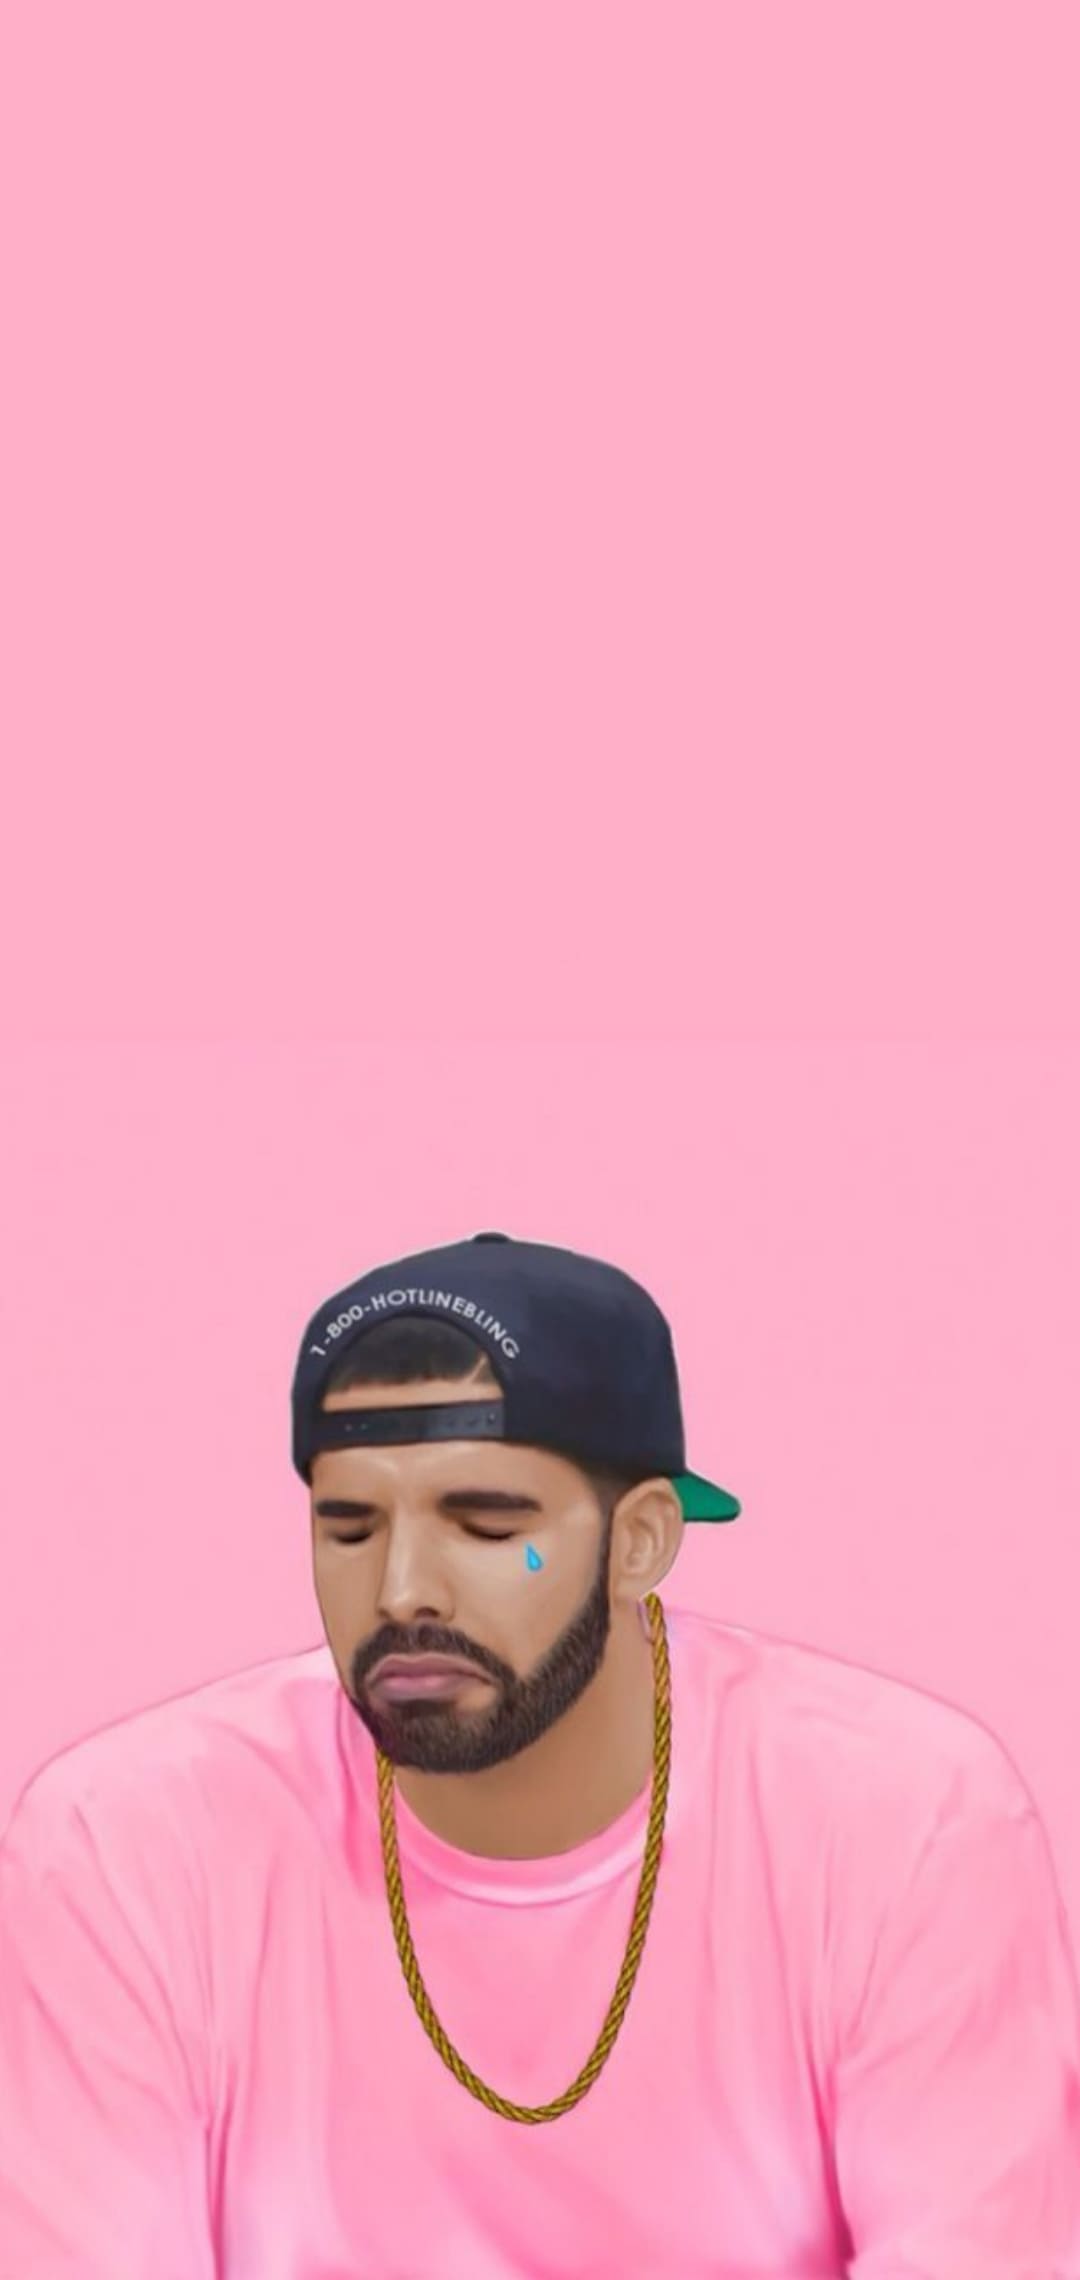 Drake Wallpaper Top Best HD Pictures Of